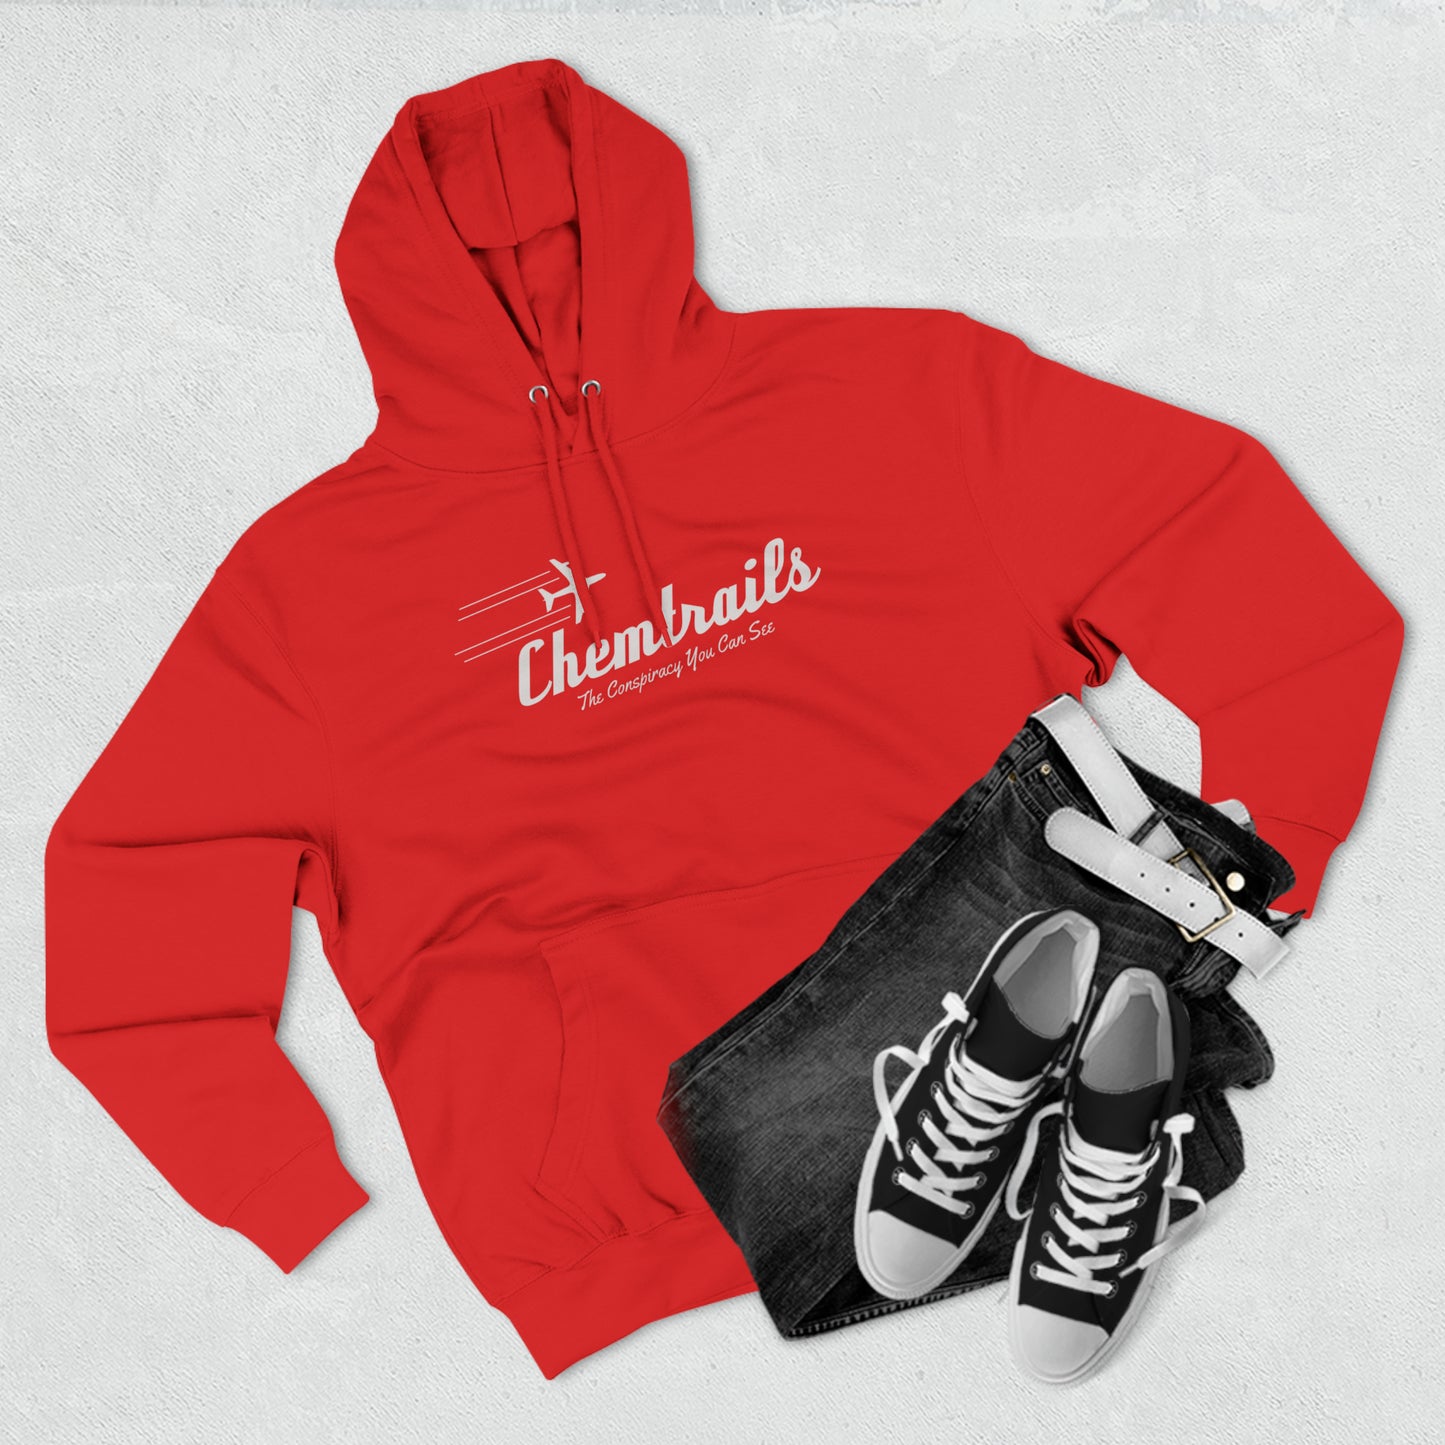 Chemtrails The Conspiracy You Can See Unisex Premium Pullover Hoodie